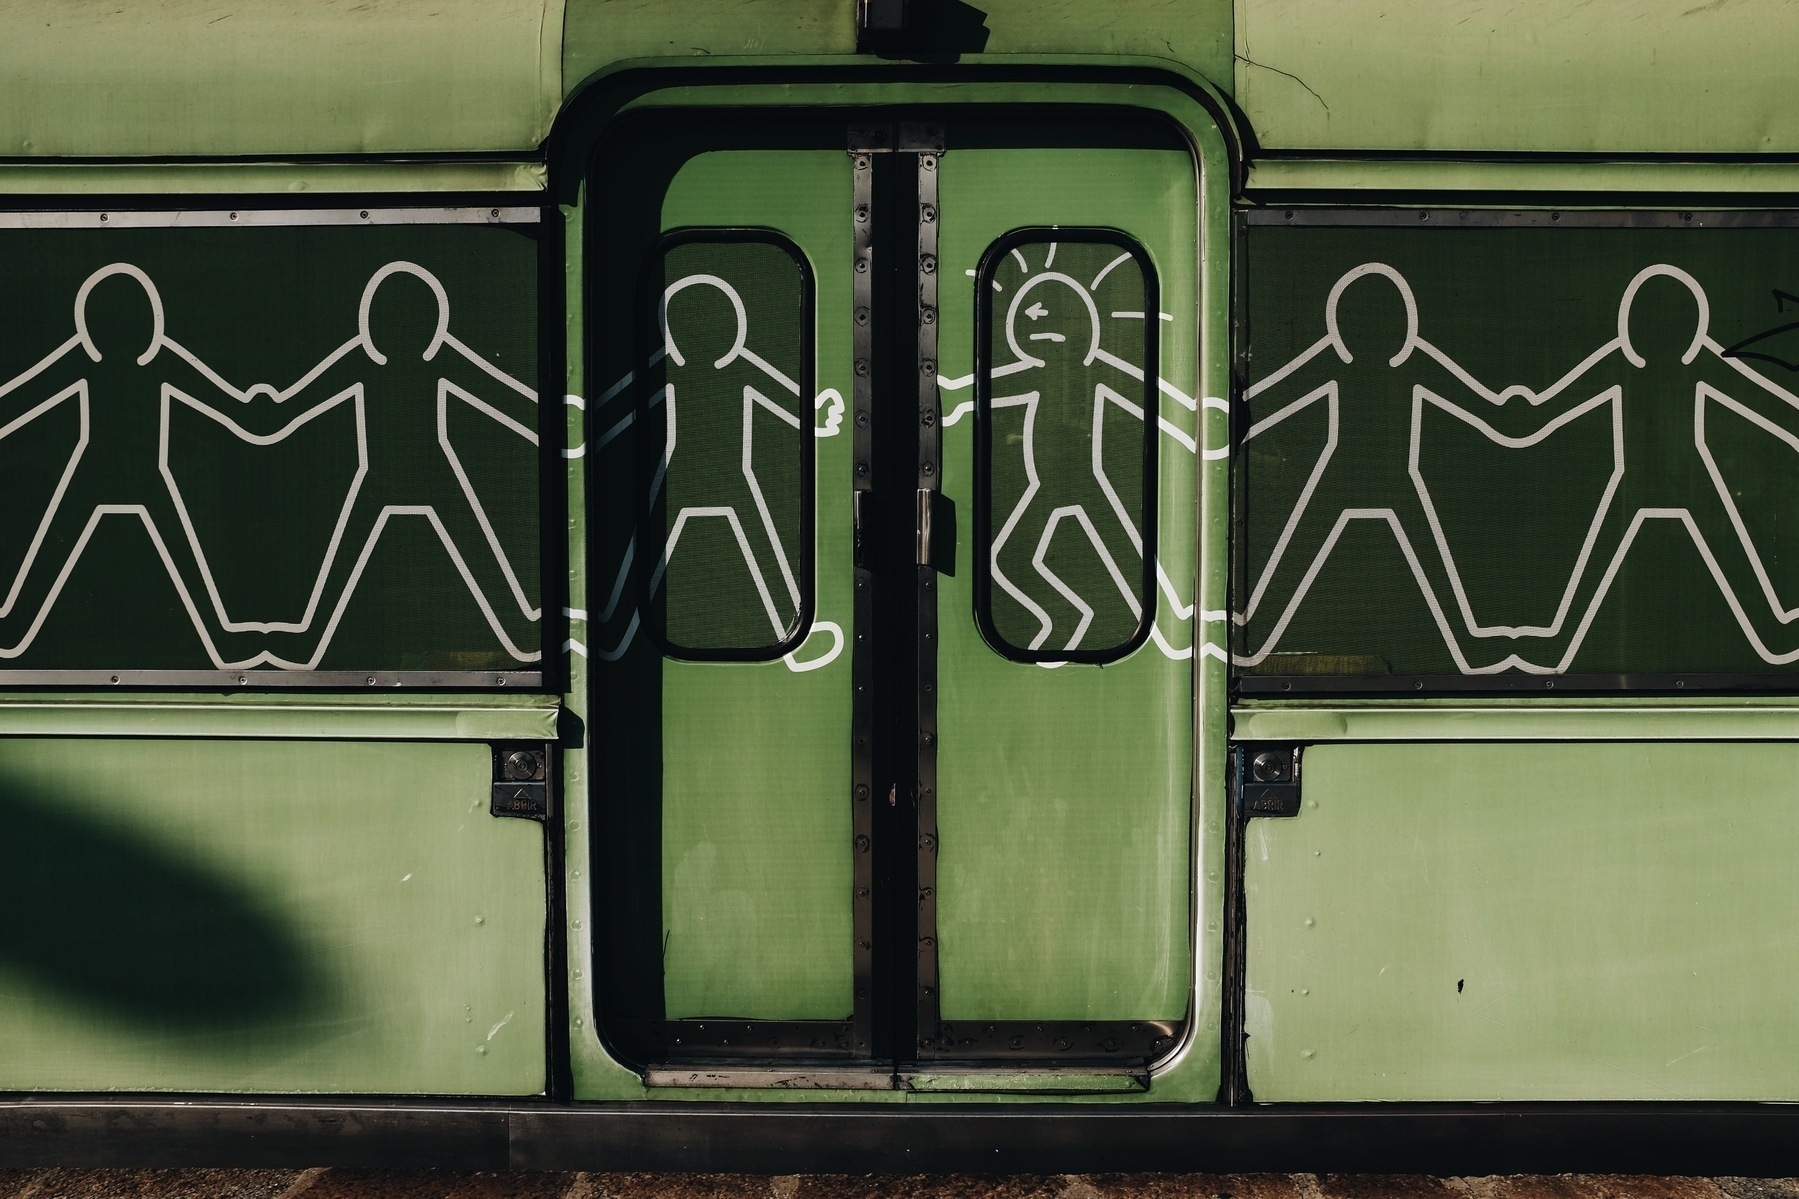 A train is painted in very low-cost Keith Haring style.